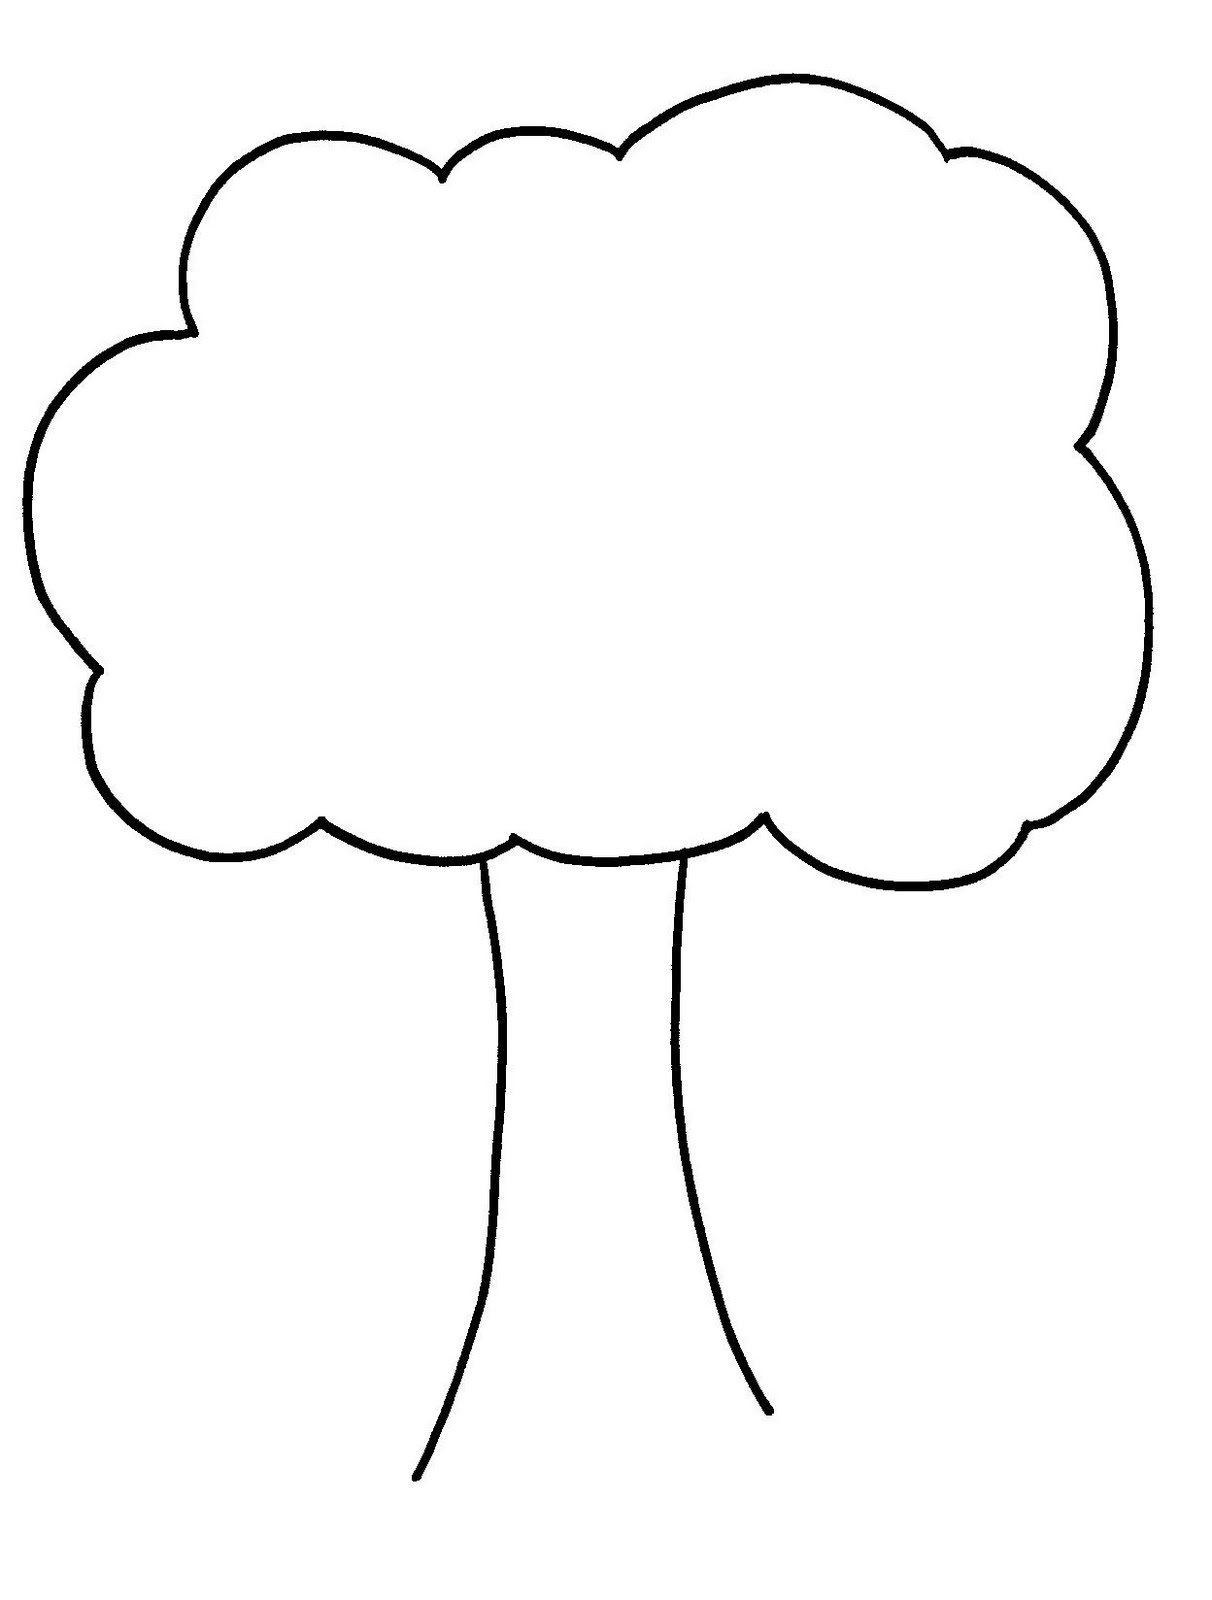 Free Tree Outline, Download Free Tree Outline Png Images, Free Cliparts On  Clipart Library